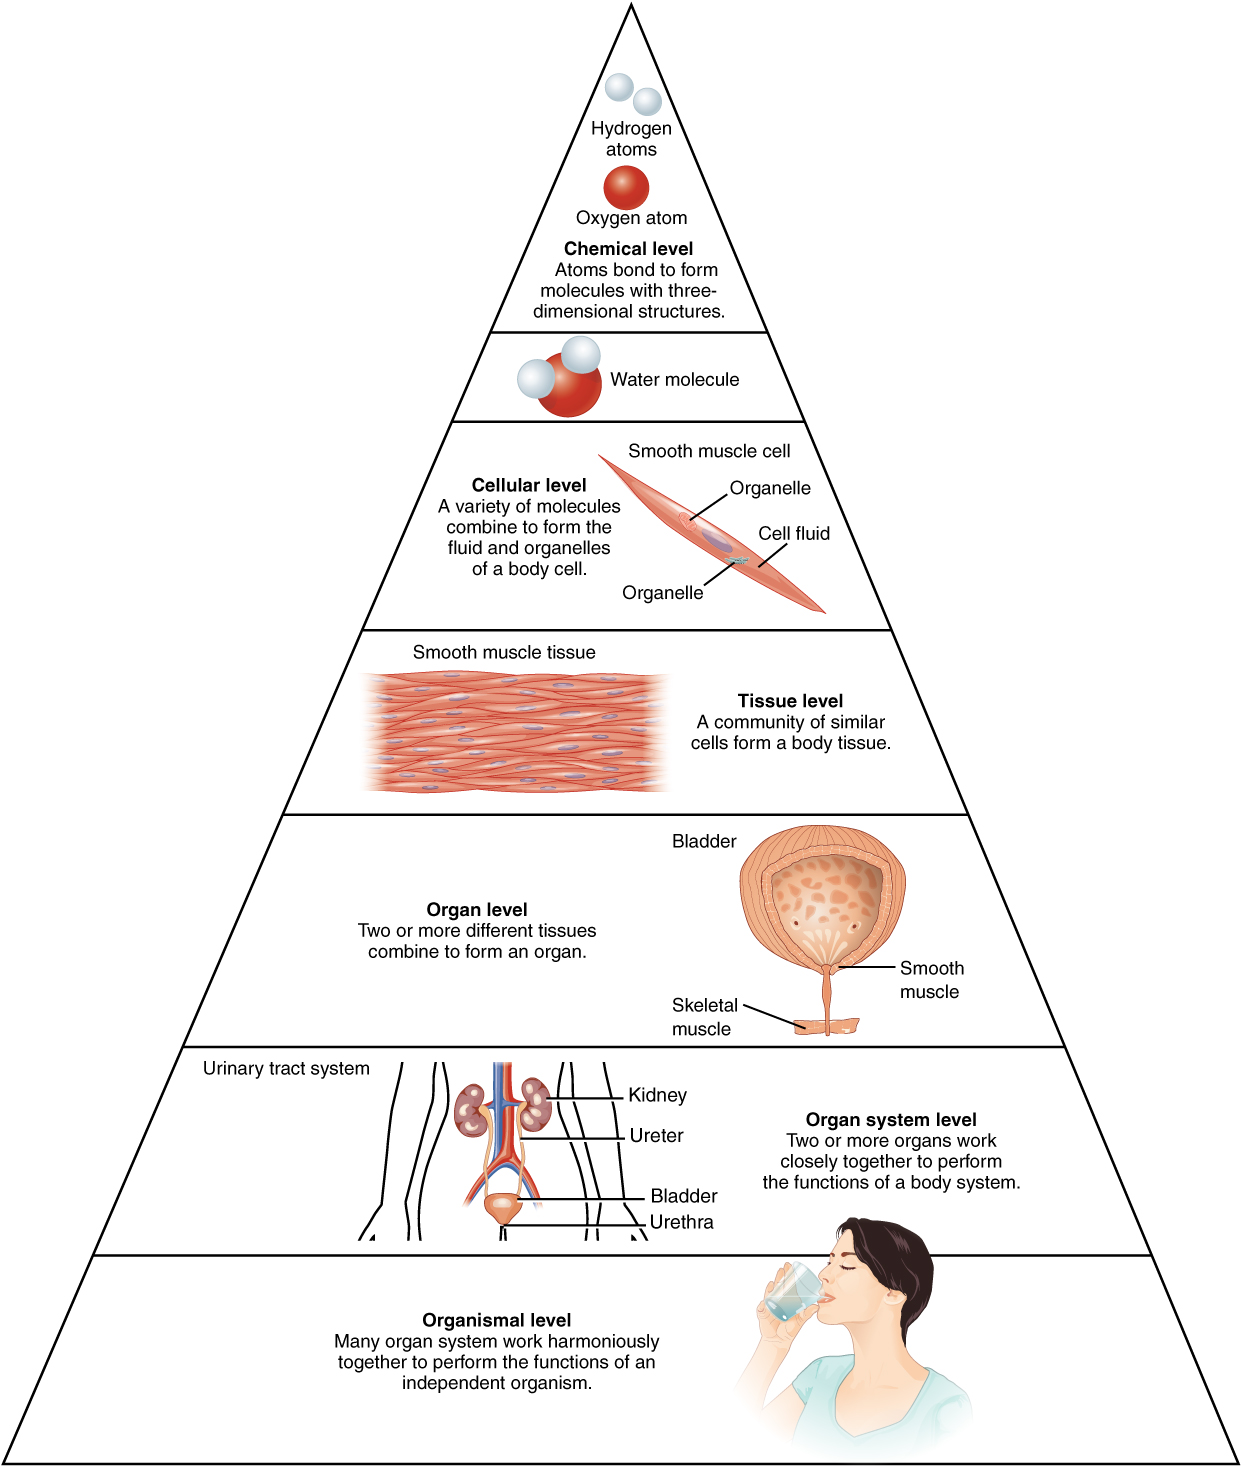 Levels of structural organization of the human body. Image description available.